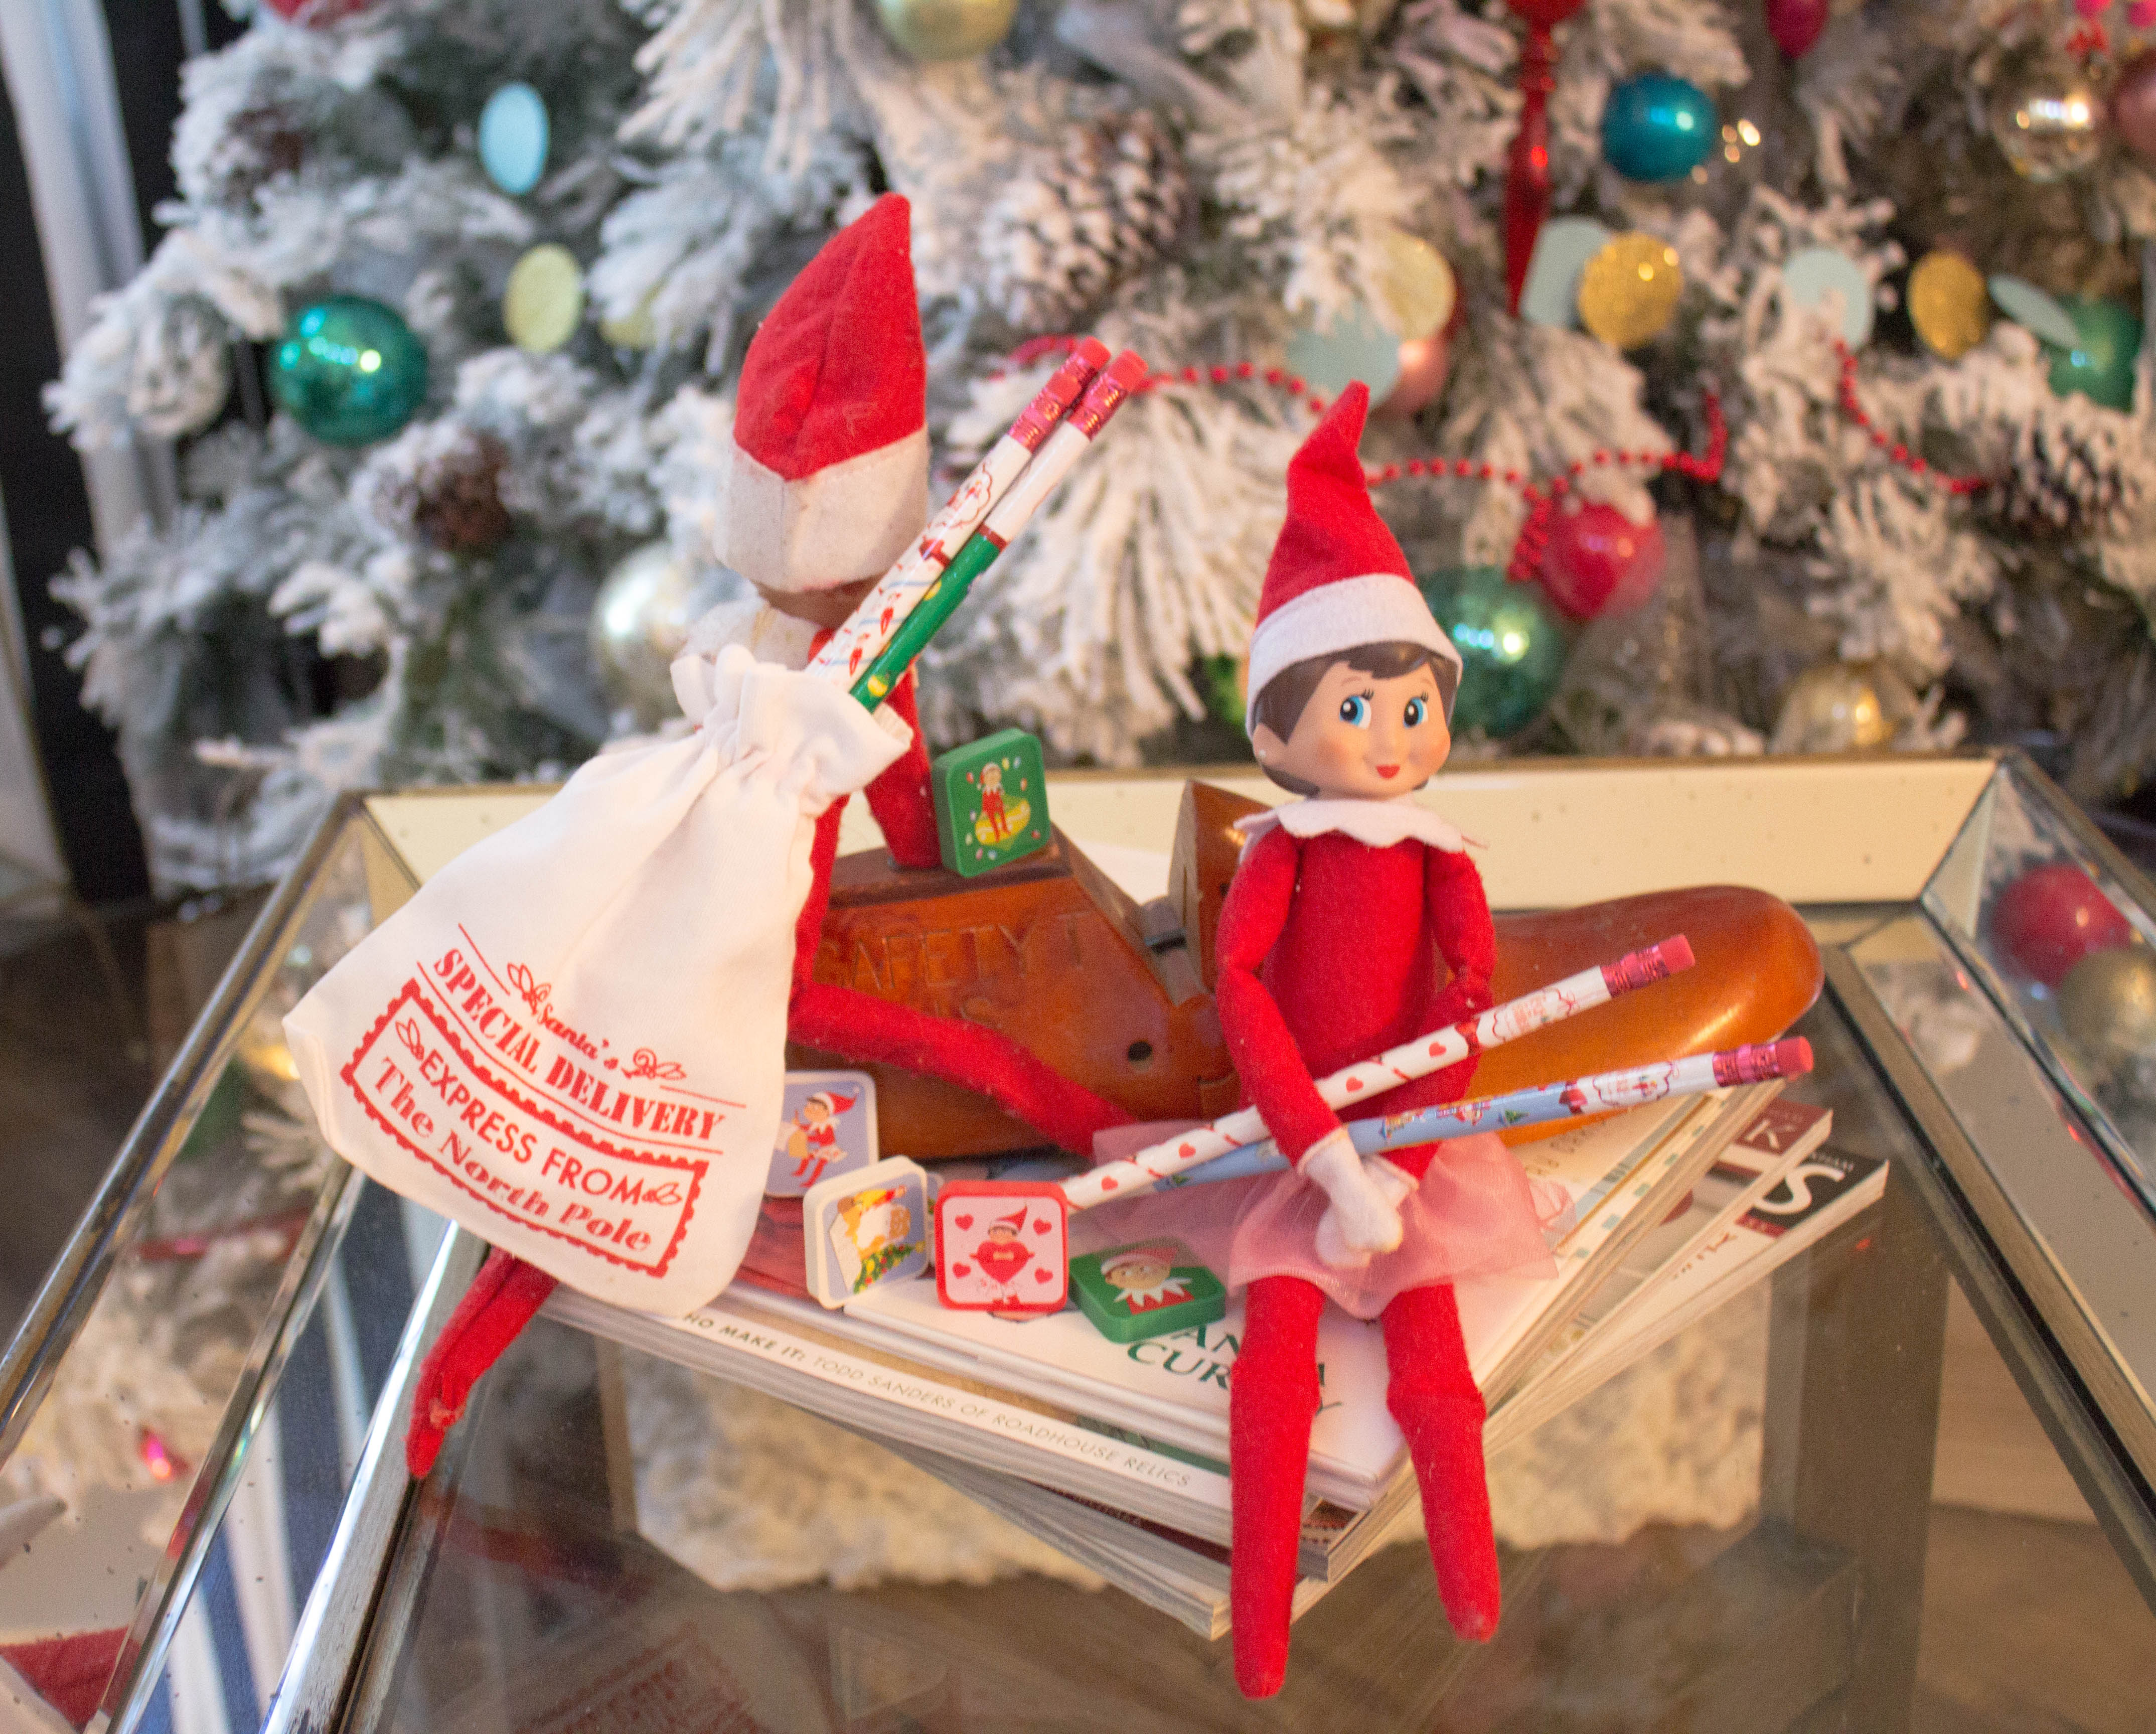 elf-on-the-shelf-ideas-and-elf-on-shelf-products-scenes-christmas-traditions-16